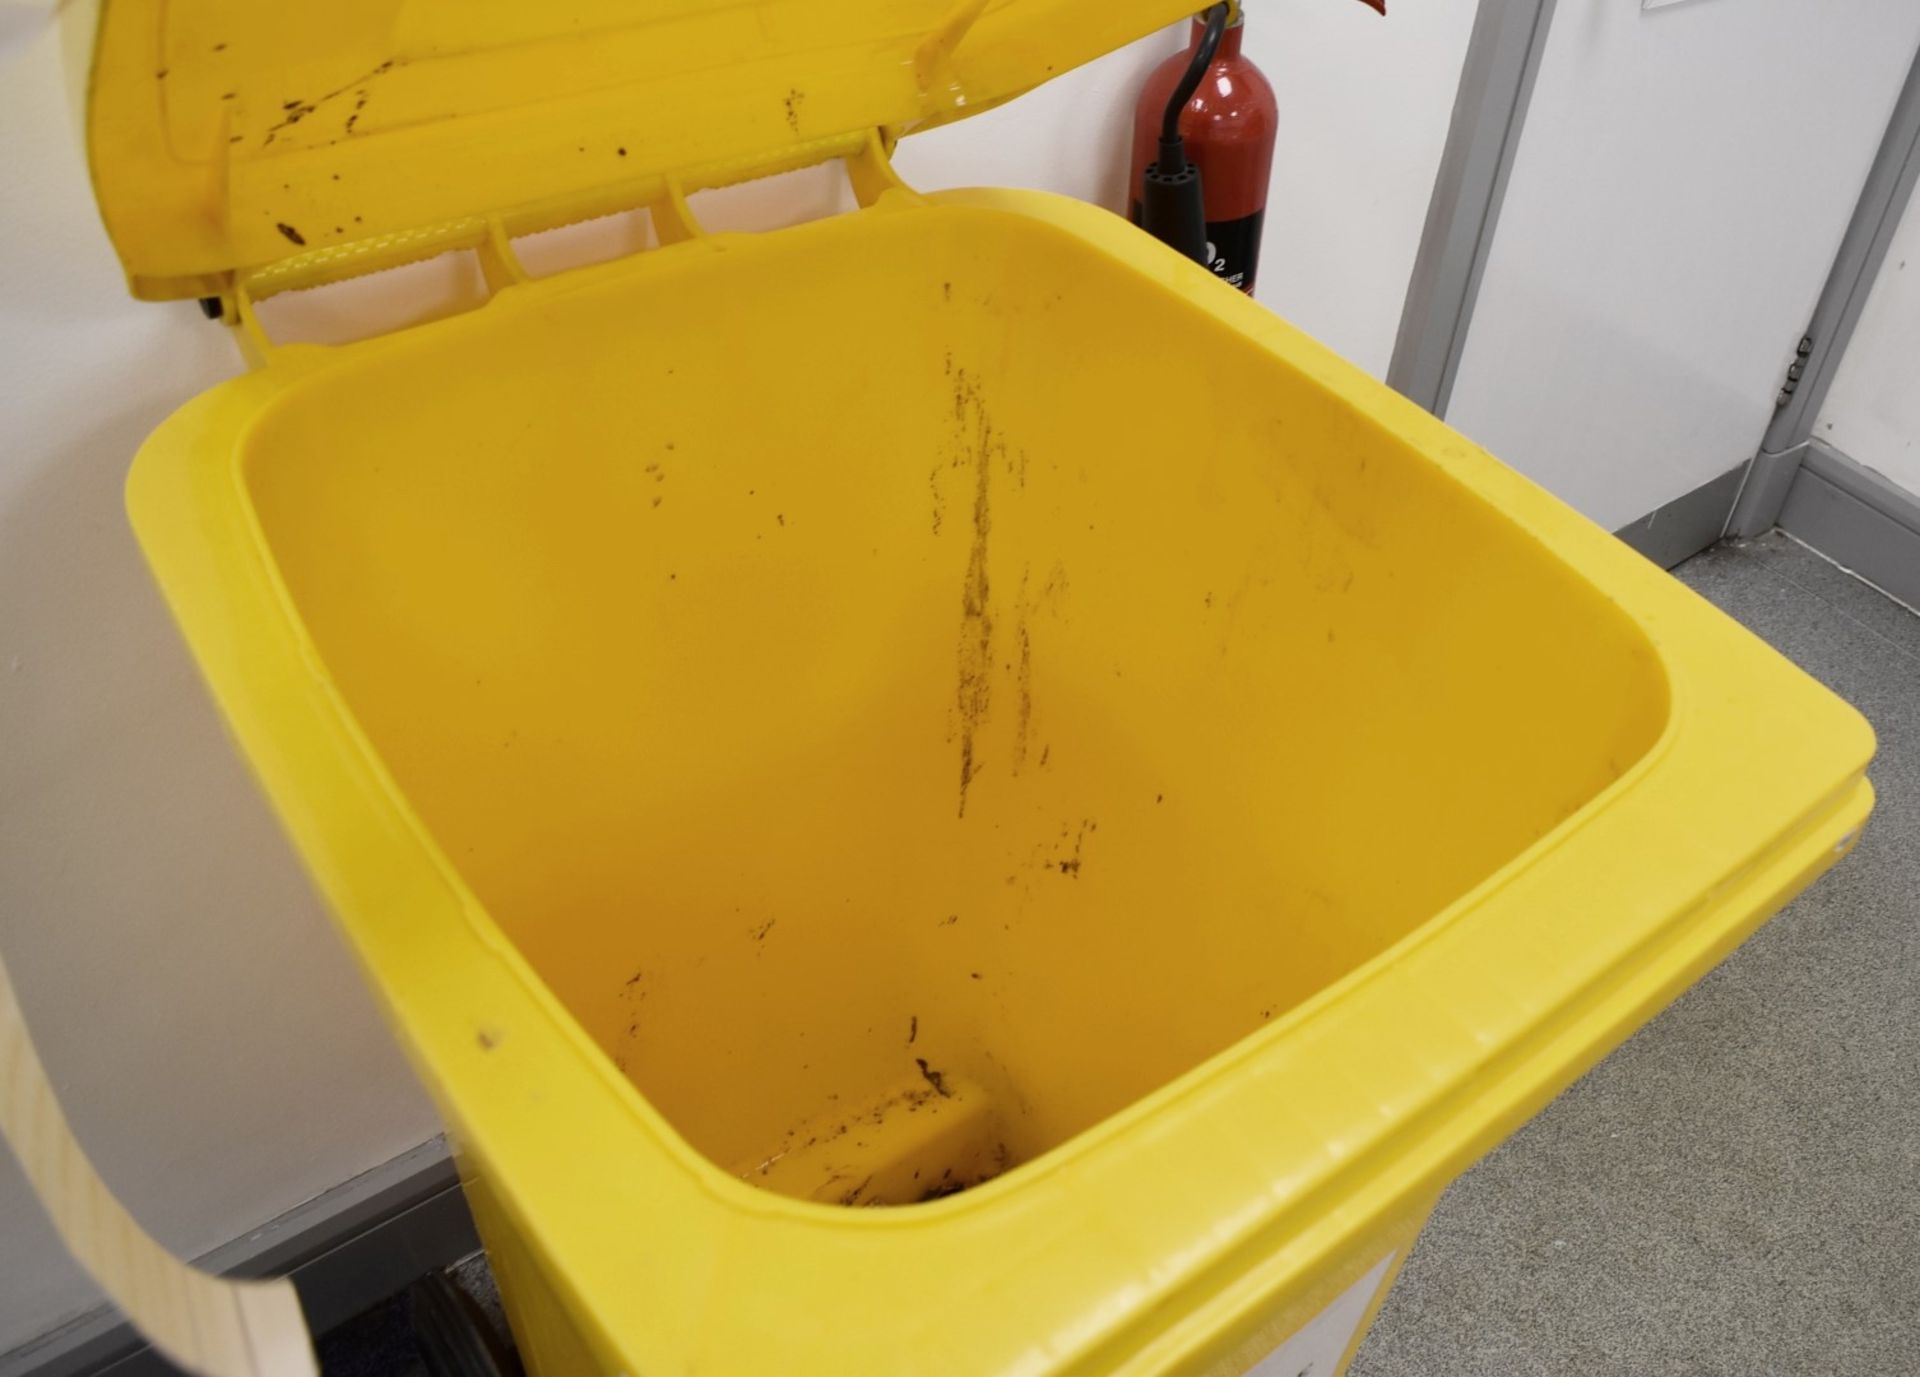 1 x Wheelie Waste Bin in Yellow - 240 Litre - Previously Used Indoors Only Good Clean Condition - Image 3 of 4